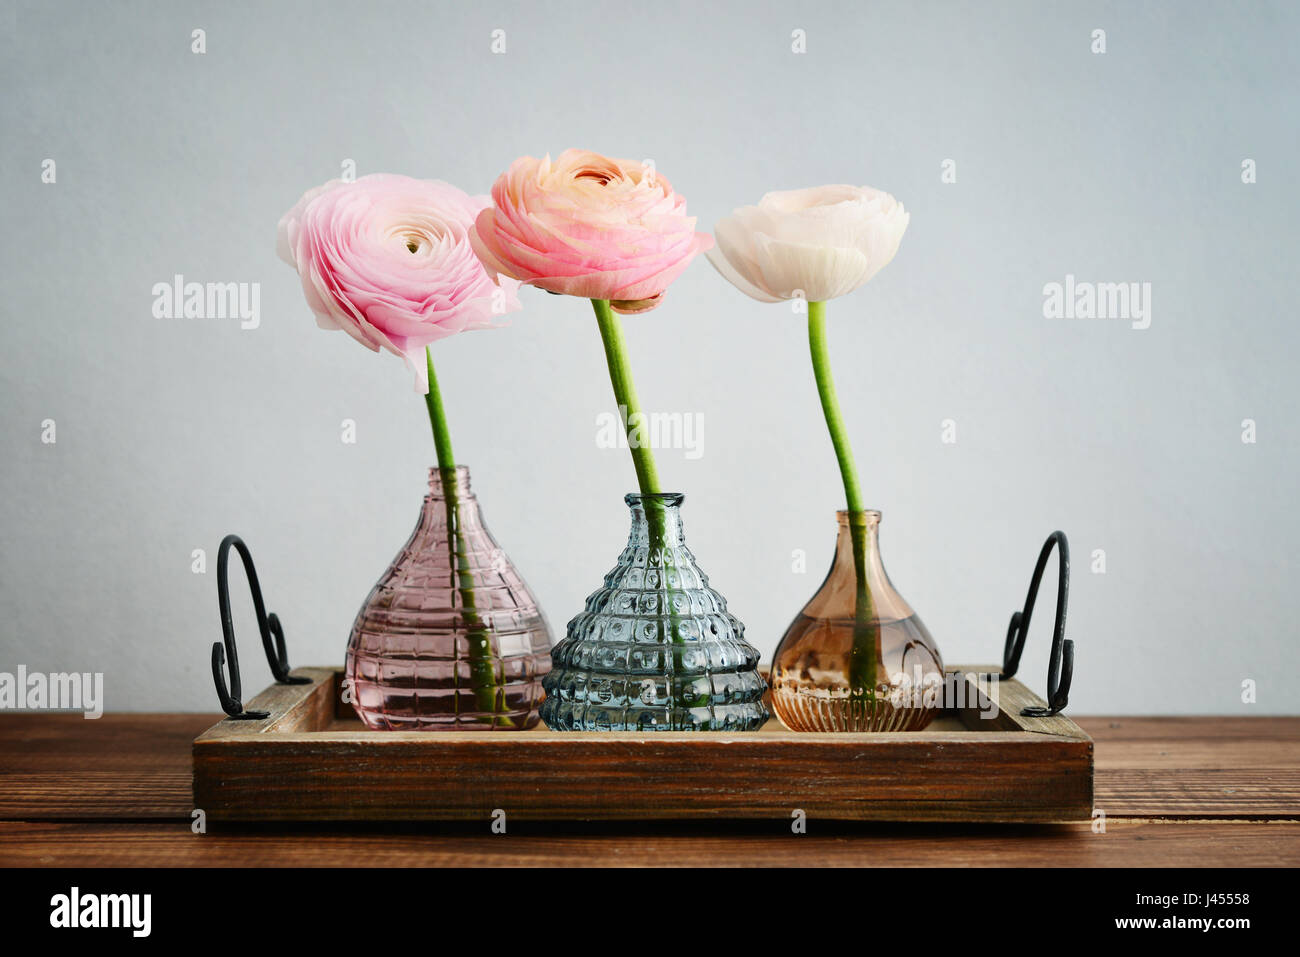 Persian buttercup flowers (ranunculus)  in vases on blue background Stock Photo